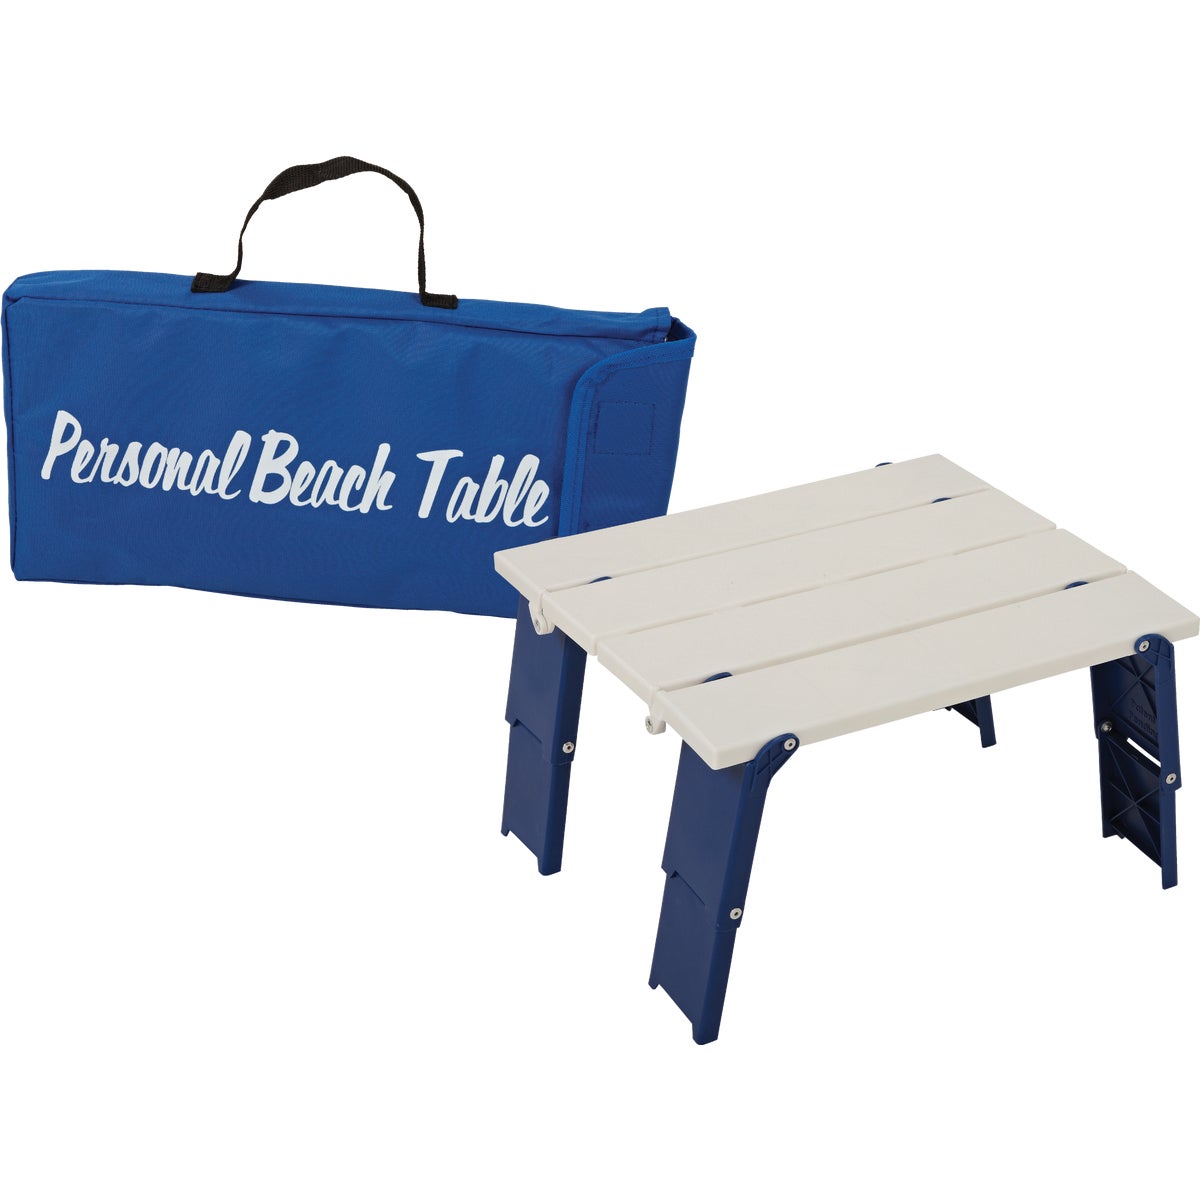 Item 801022, Compact personal beach table folds down for easy storage and transport.